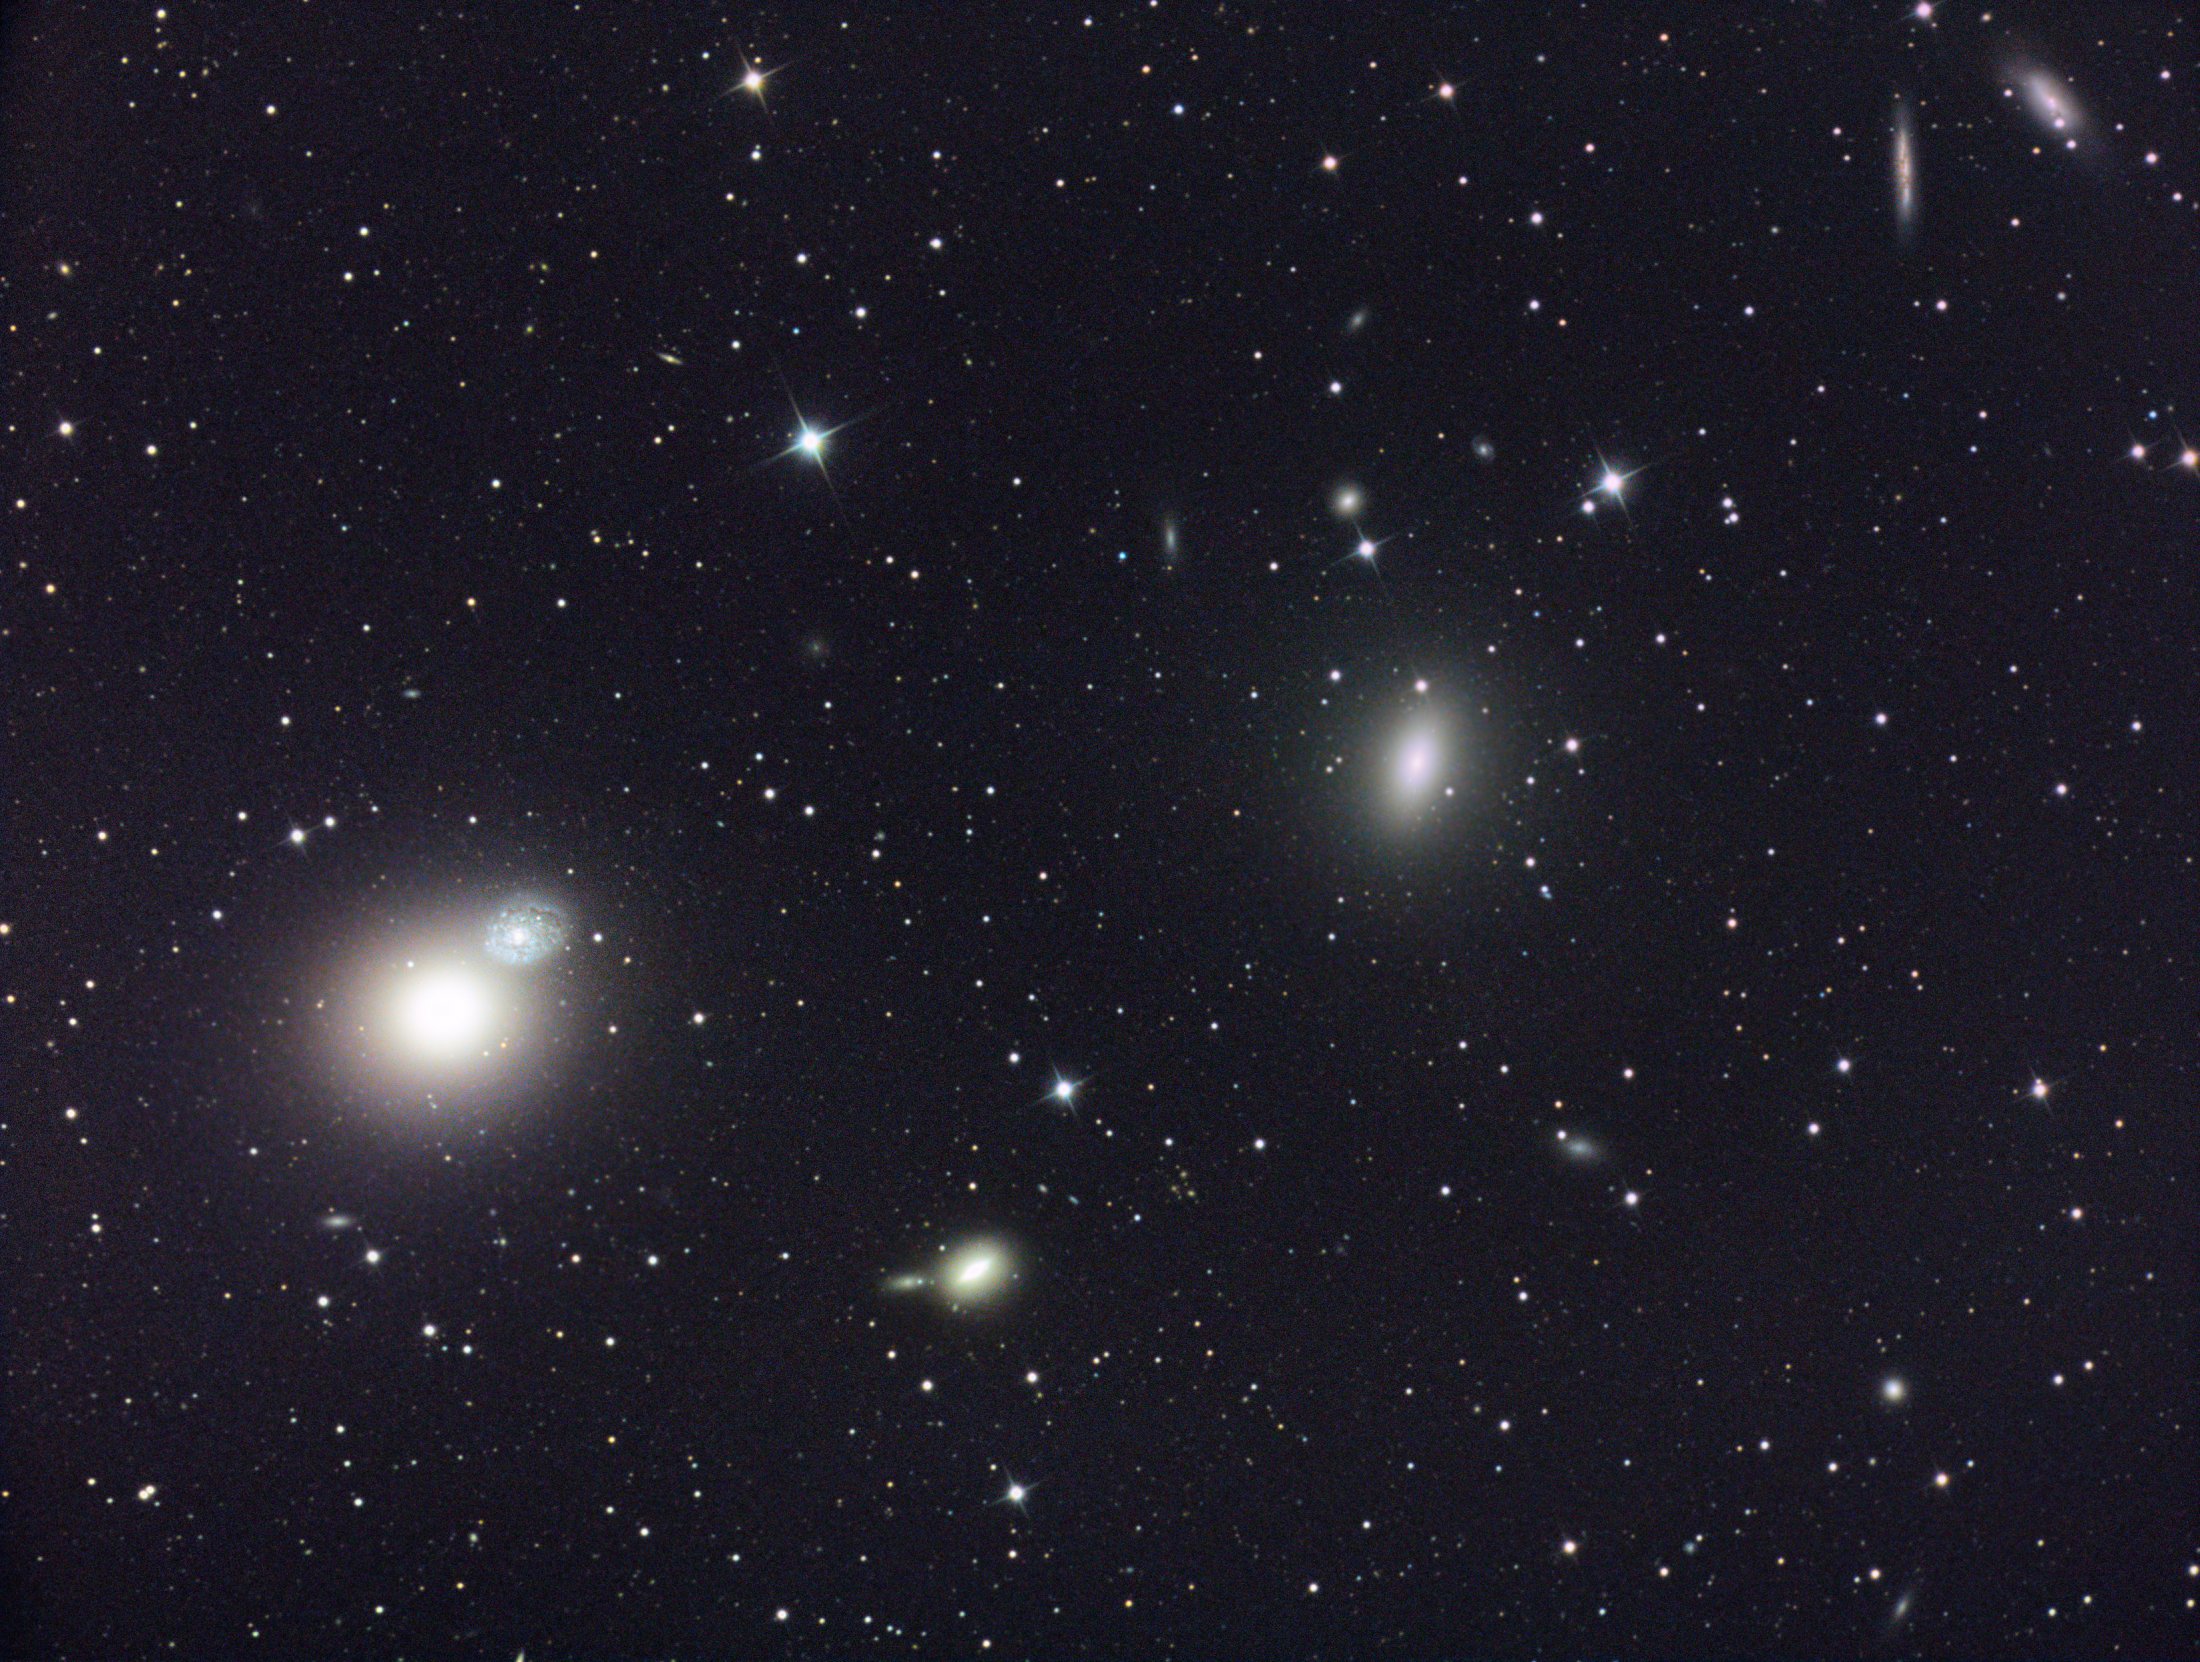 M60 and Virgo cluster